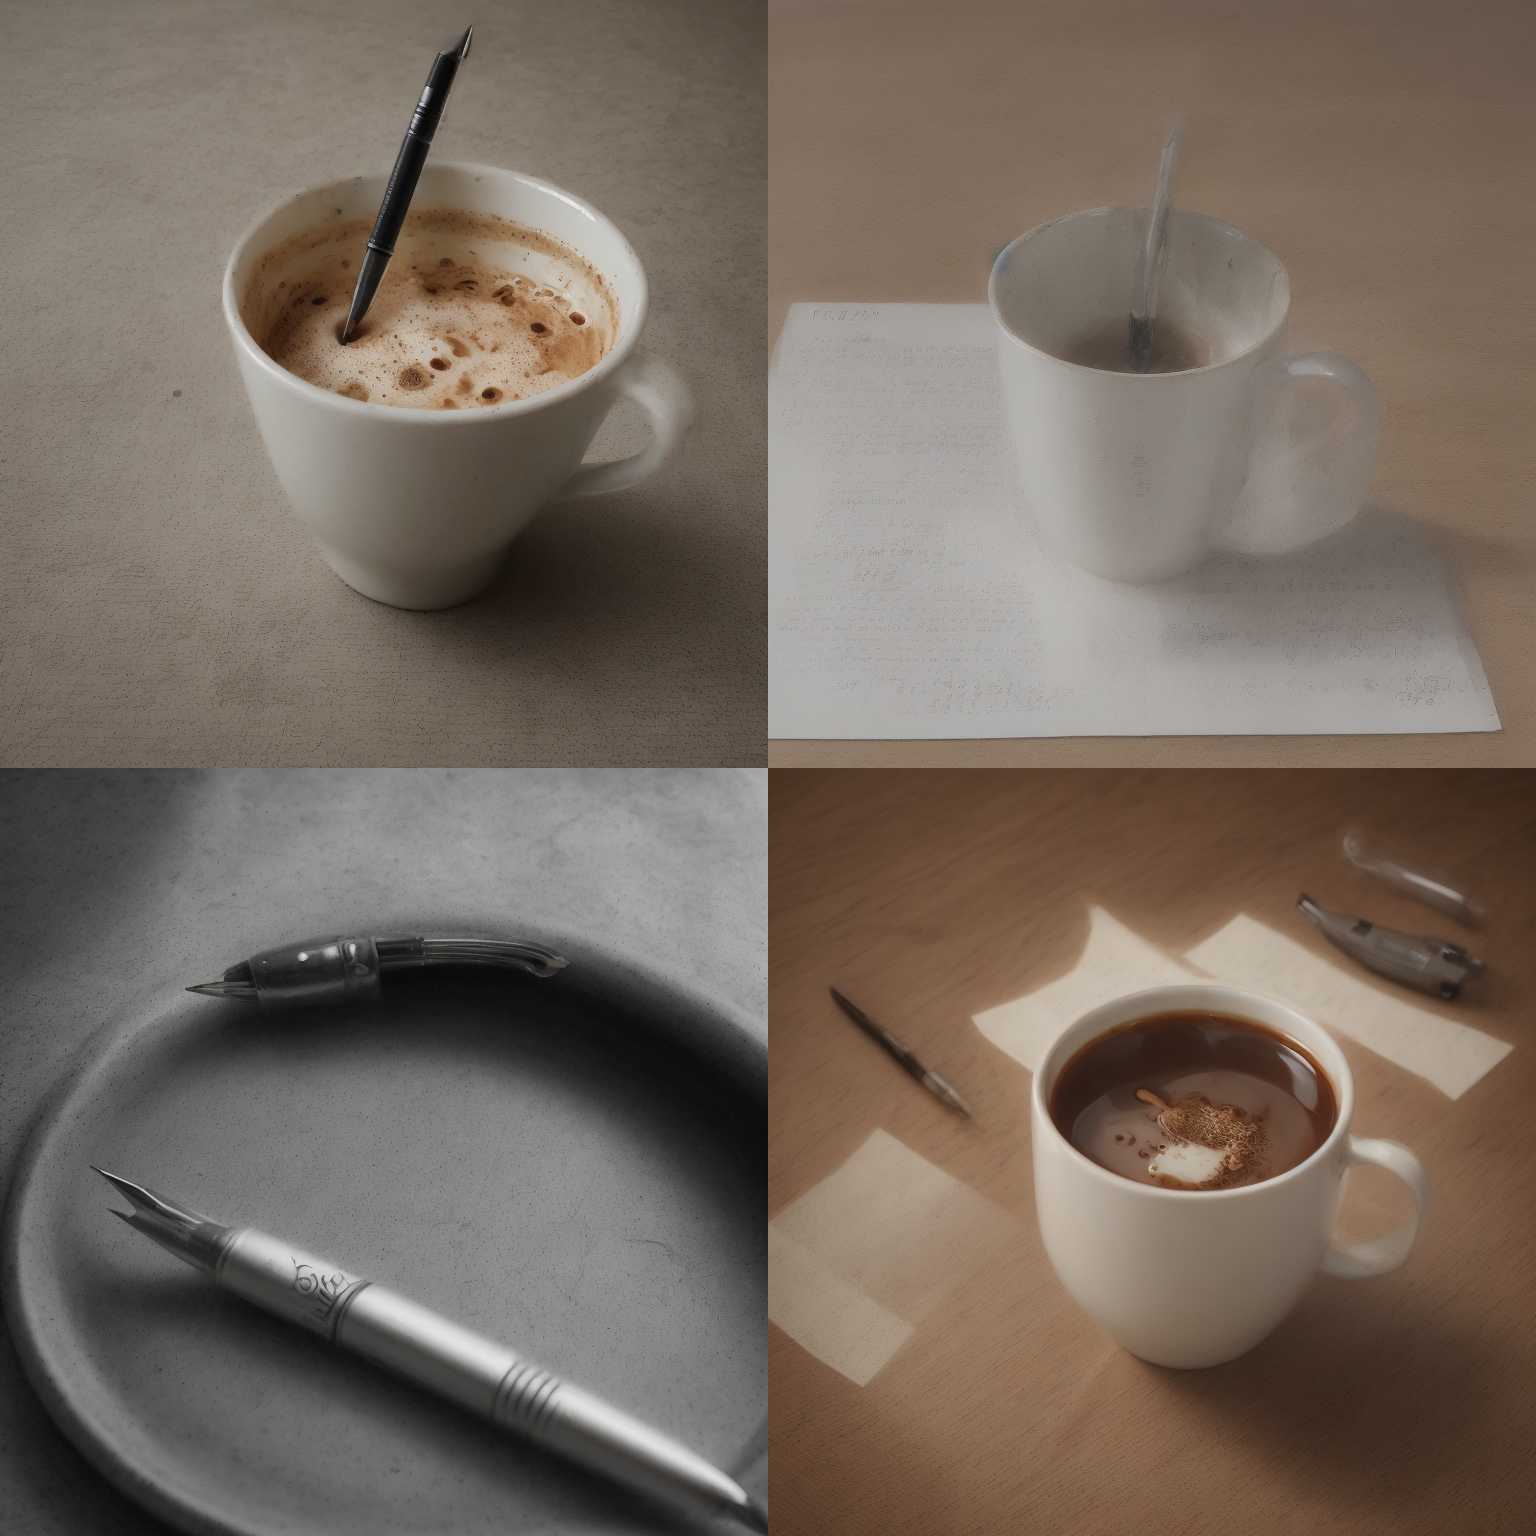 a pen placed in an empty cup